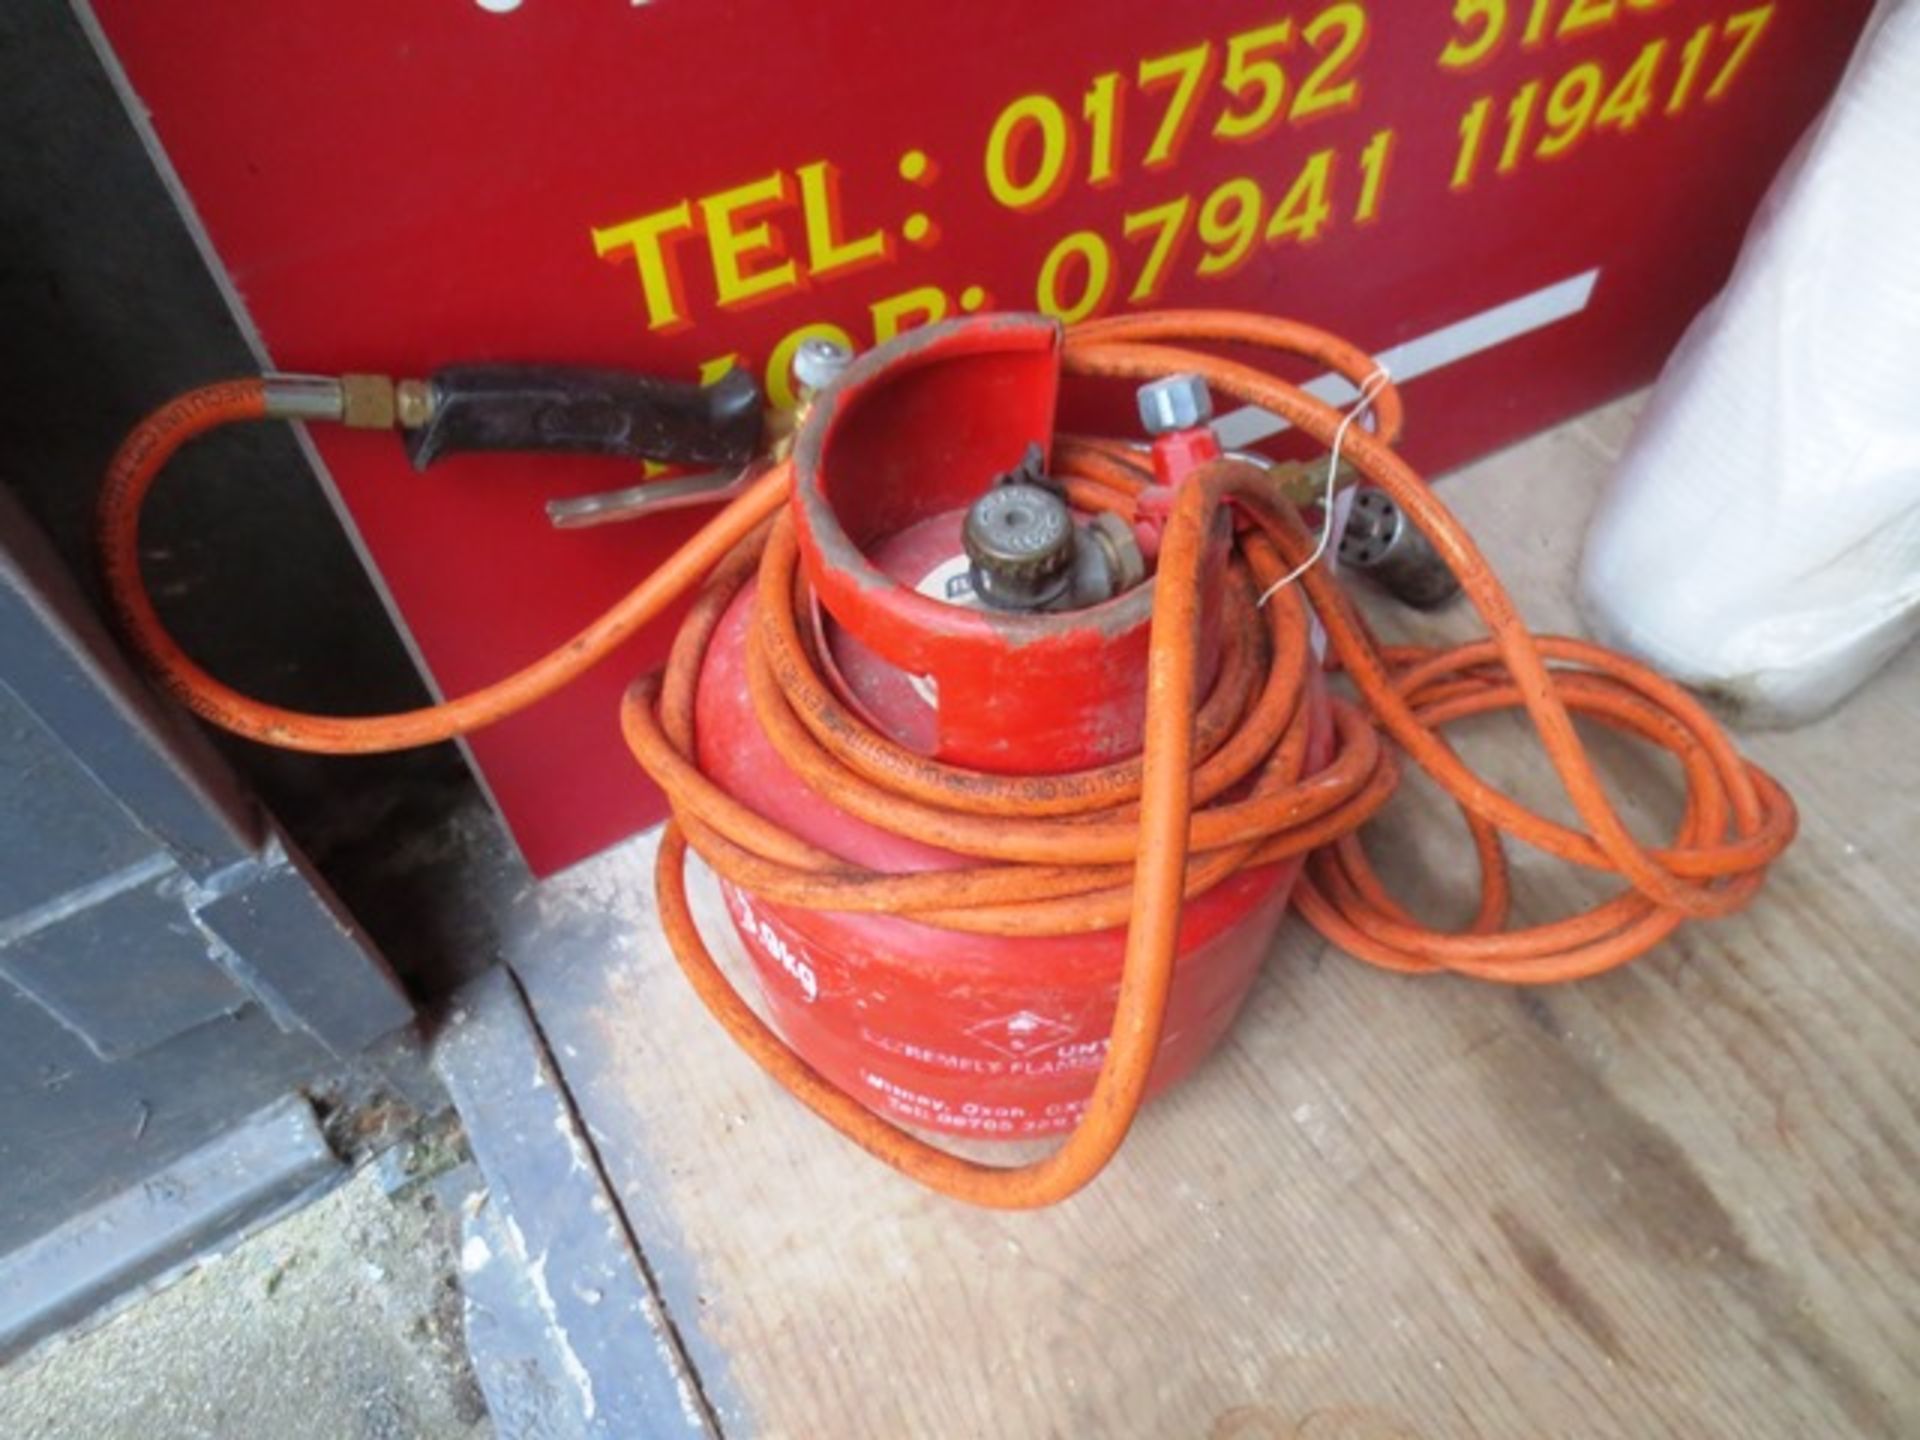 Manual blow torch, hose and regulator (gas bottle excluded)